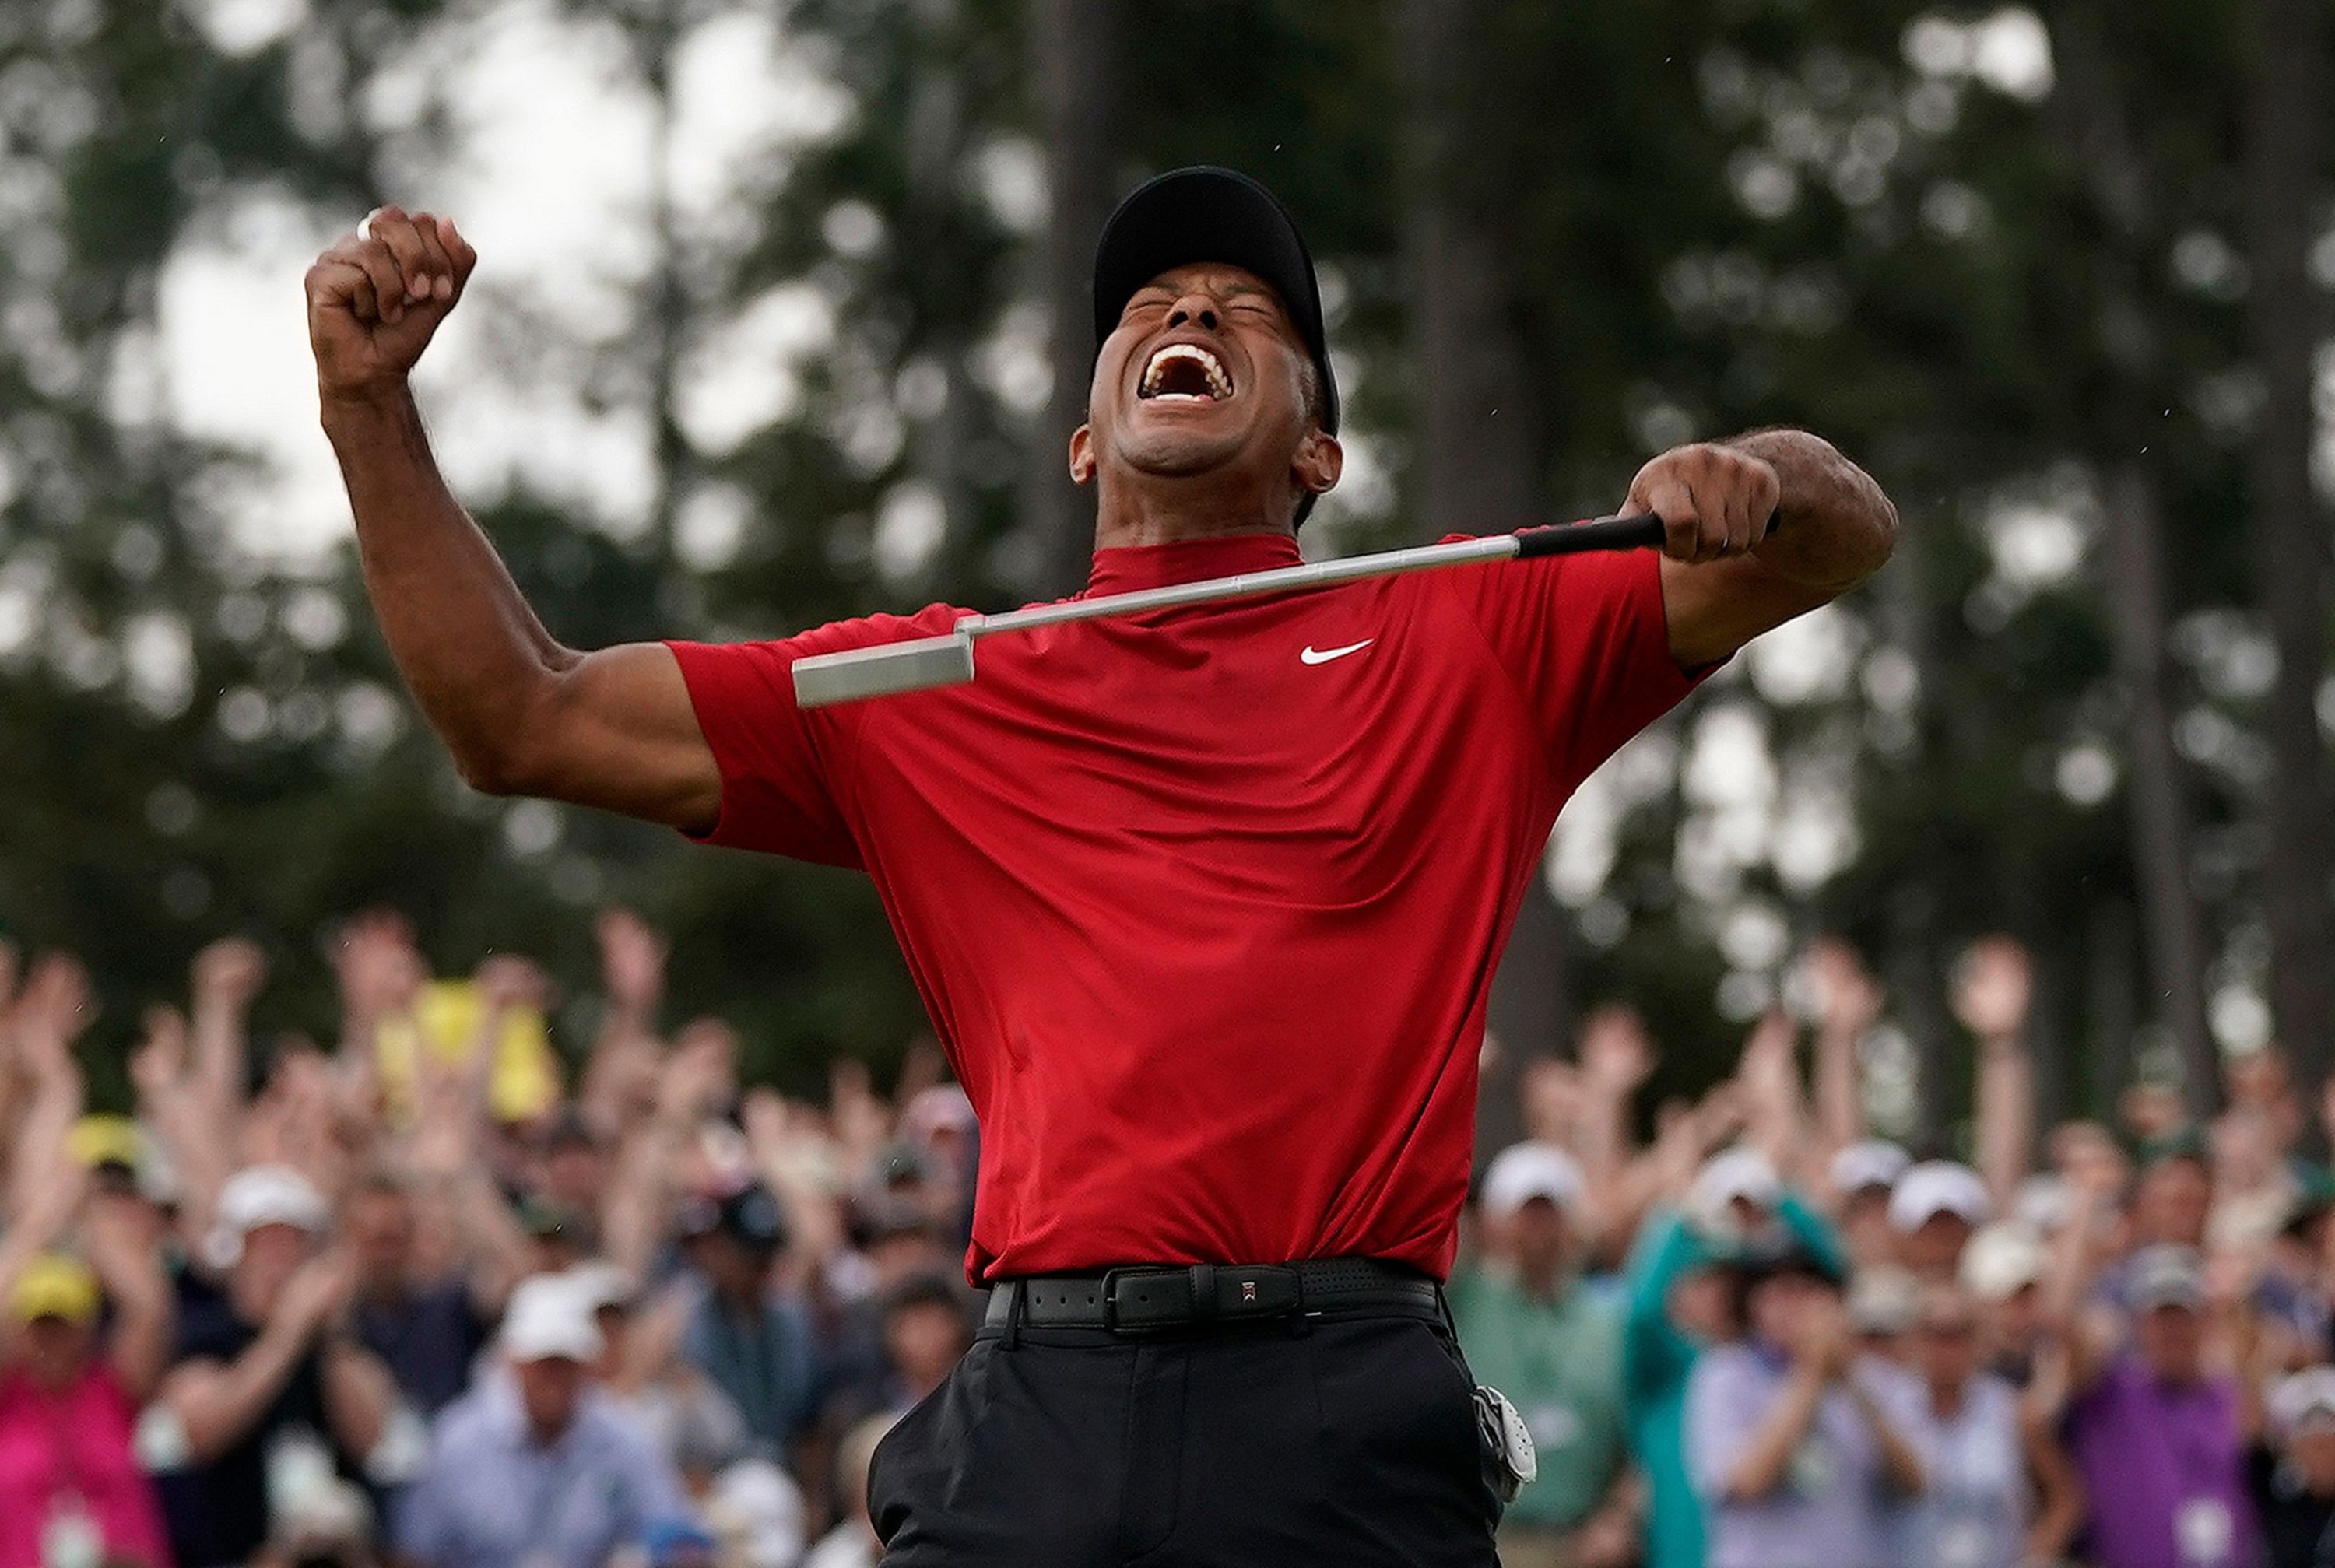 Tiger Woods reacts after winning the Masters golf tournament in April 2019. It was his 15th major title and <a href="index.php?page=&url=https%3A%2F%2Fedition.cnn.com%2F2019%2F04%2F14%2Fsport%2Fmasters-2019-augusta-final-round-spt-intl%2Findex.html" target="_blank">his first since 2008.</a>